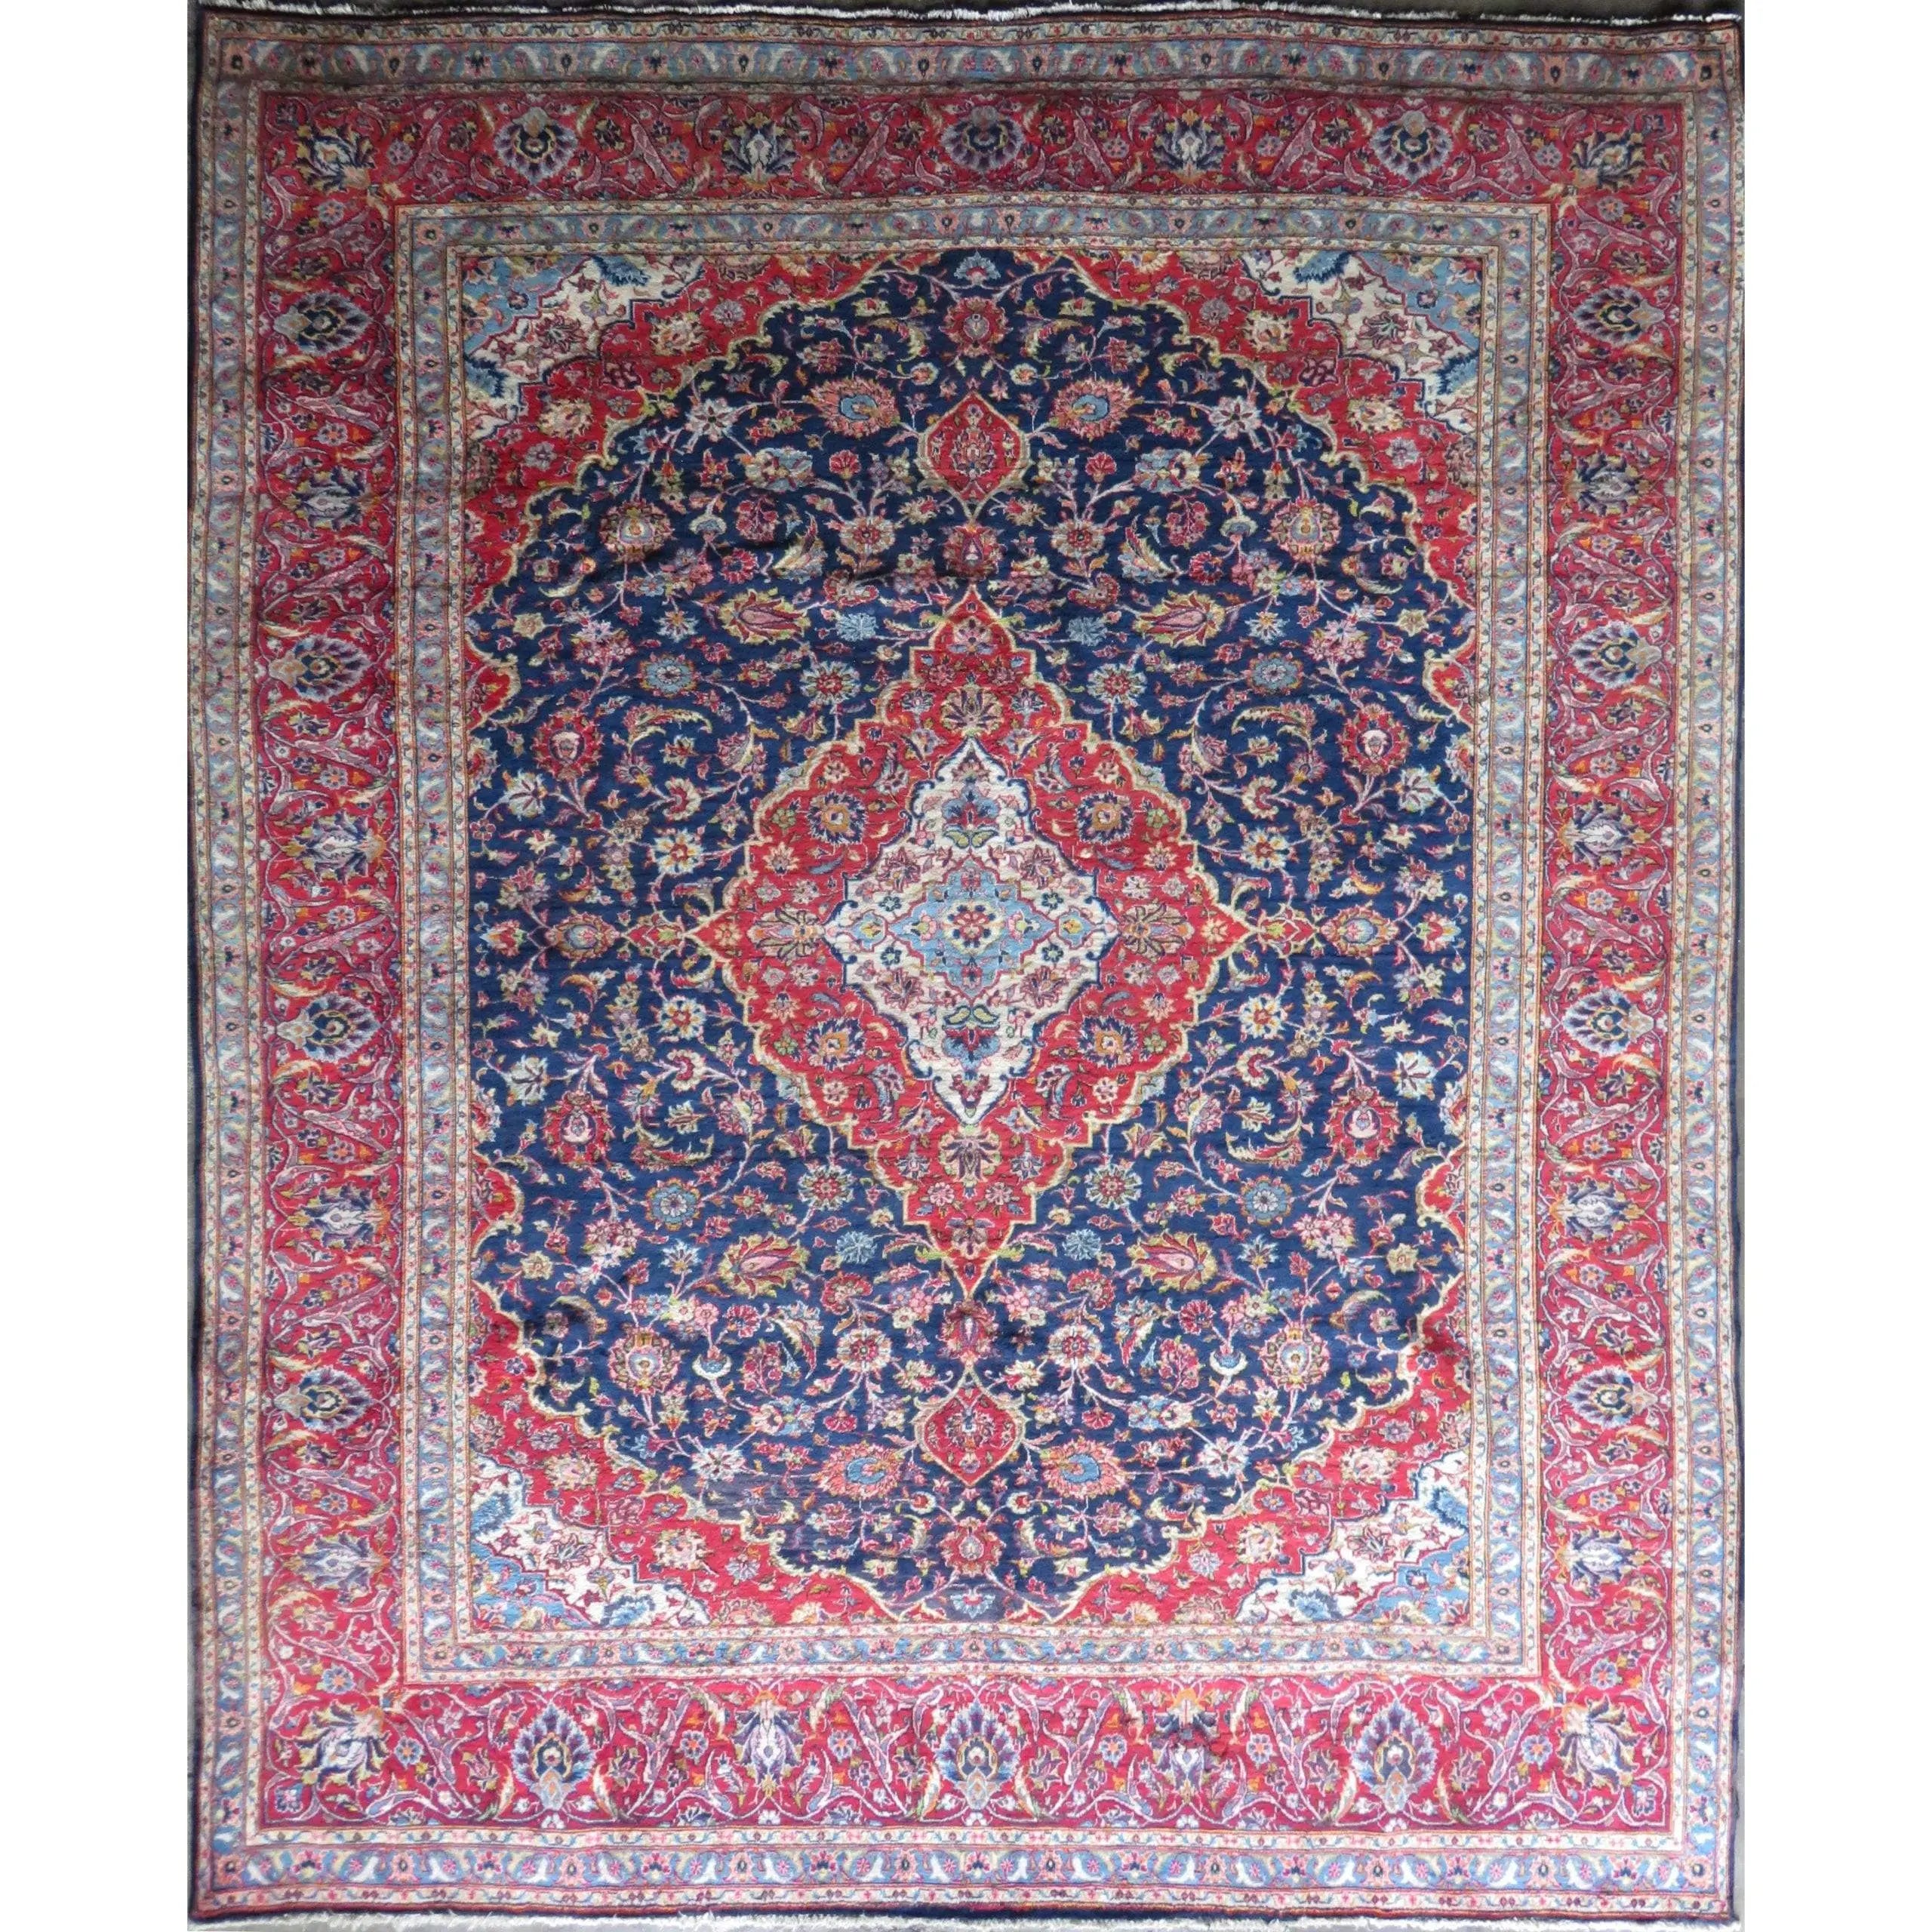 Hand-Knotted Persian Wool Rug _ Luxurious Vintage Design, 11'6" X 9'5", Artisan Crafted